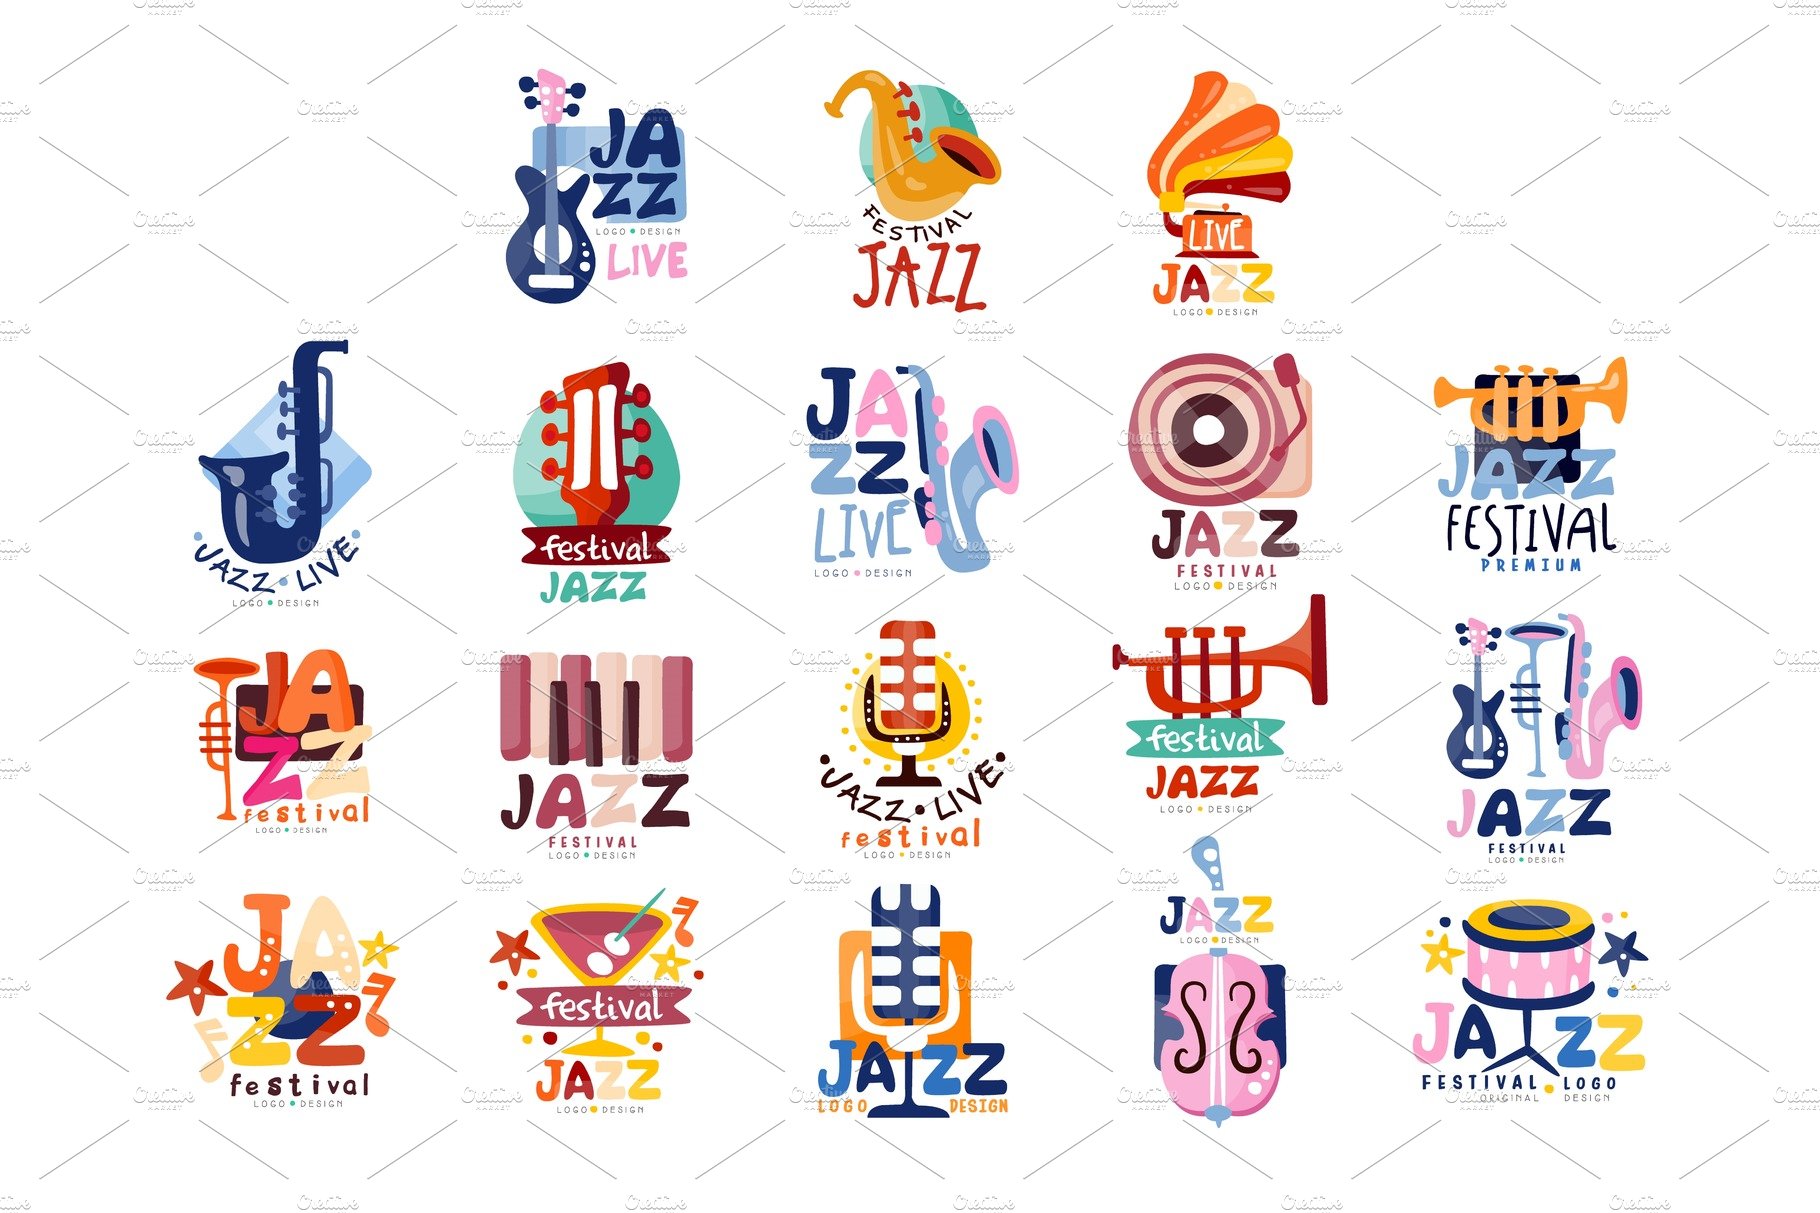 Logos set for jazz festival or live cover image.